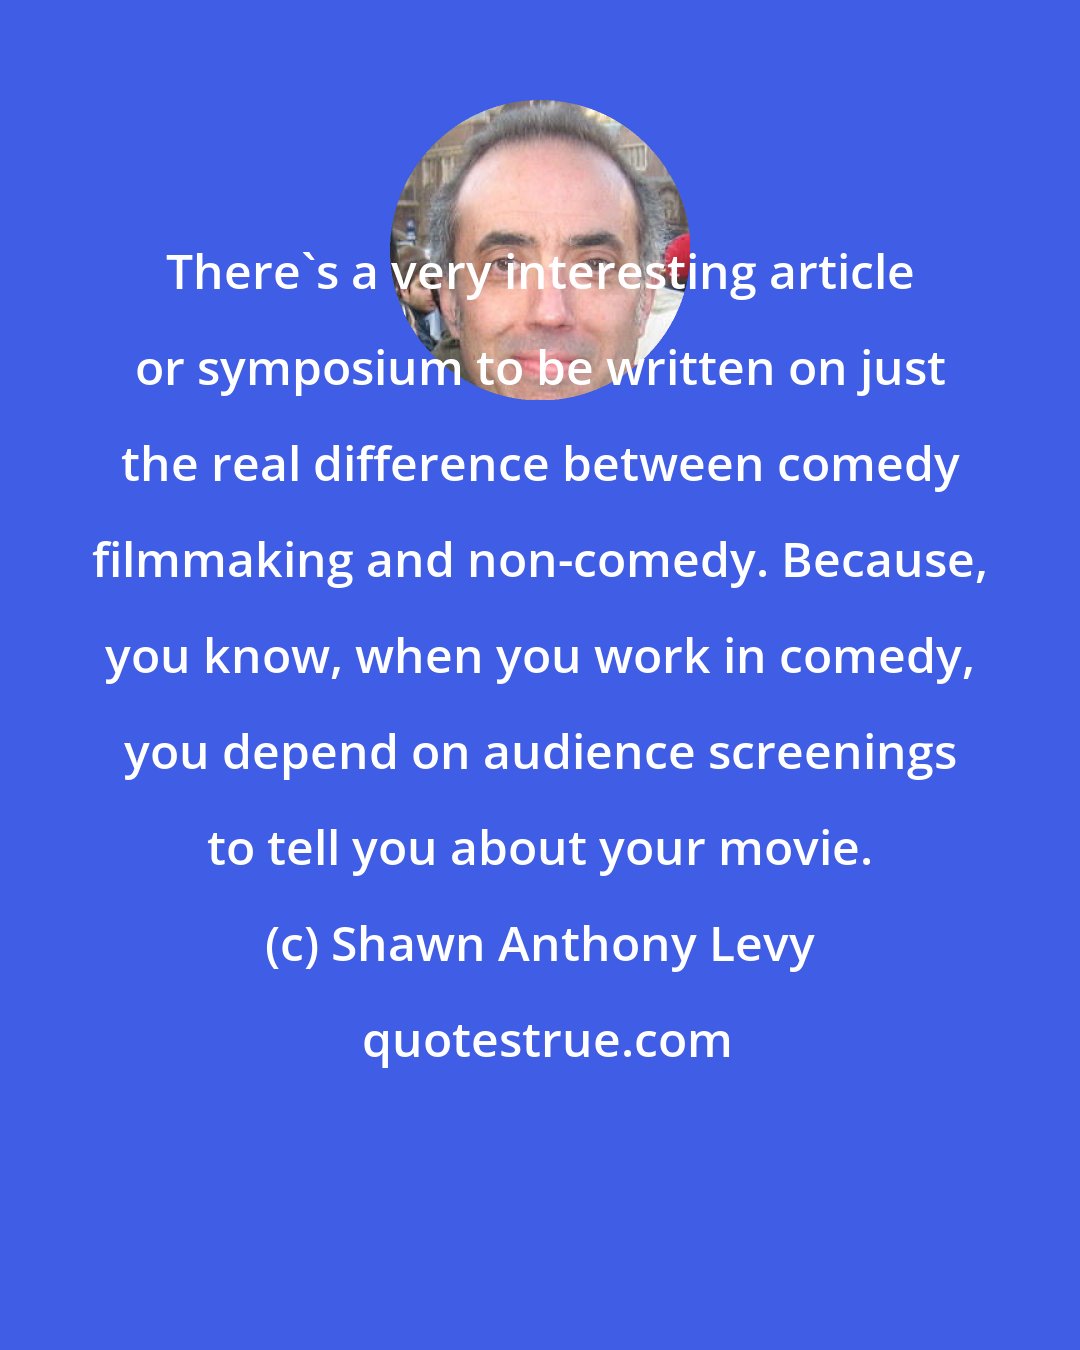 Shawn Anthony Levy: There's a very interesting article or symposium to be written on just the real difference between comedy filmmaking and non-comedy. Because, you know, when you work in comedy, you depend on audience screenings to tell you about your movie.